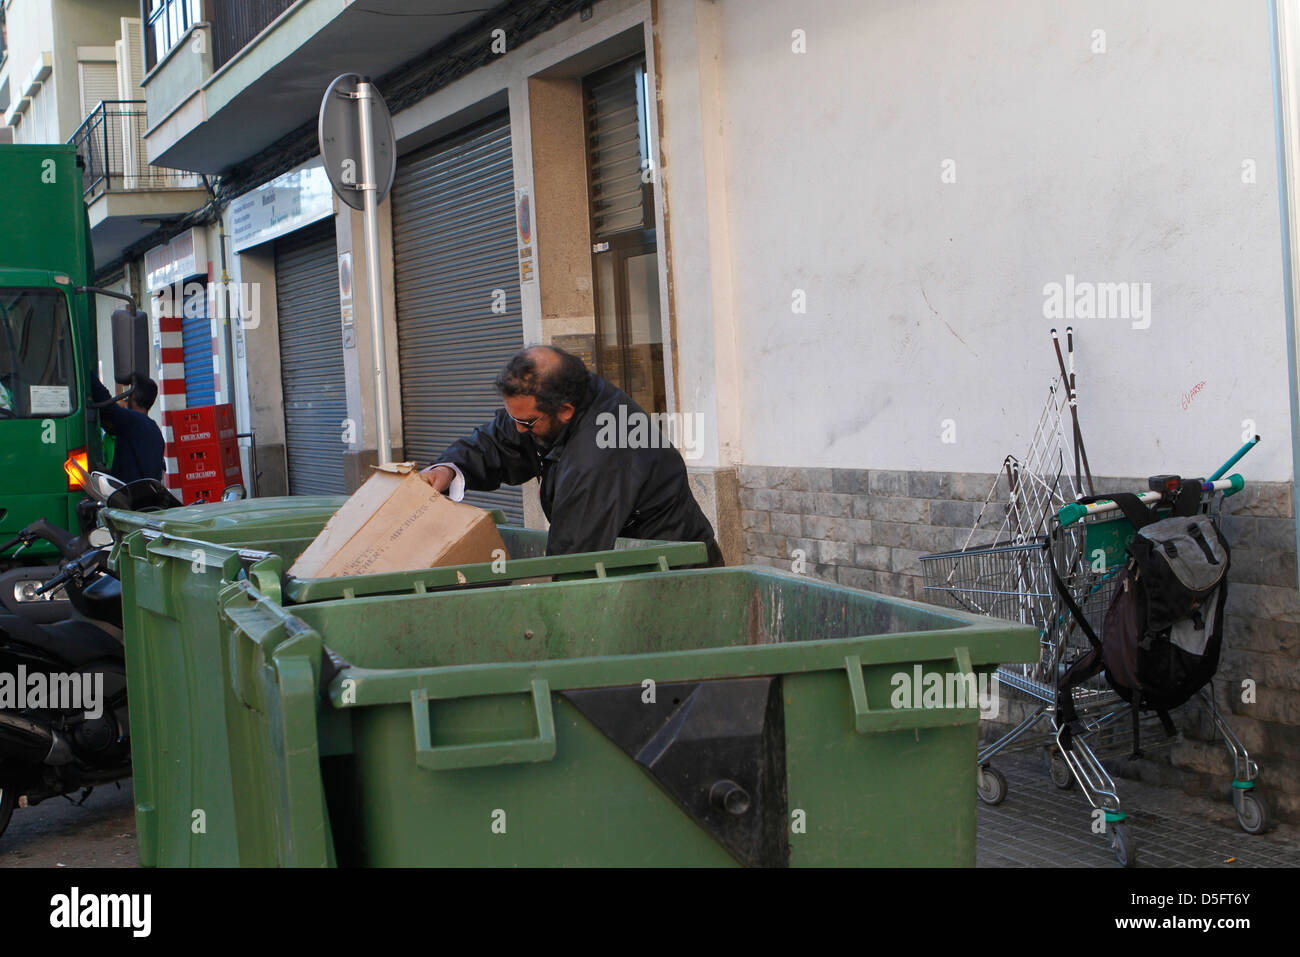 A jobless man pulls a trolley to carry the junk found on the bins. Stock Photo